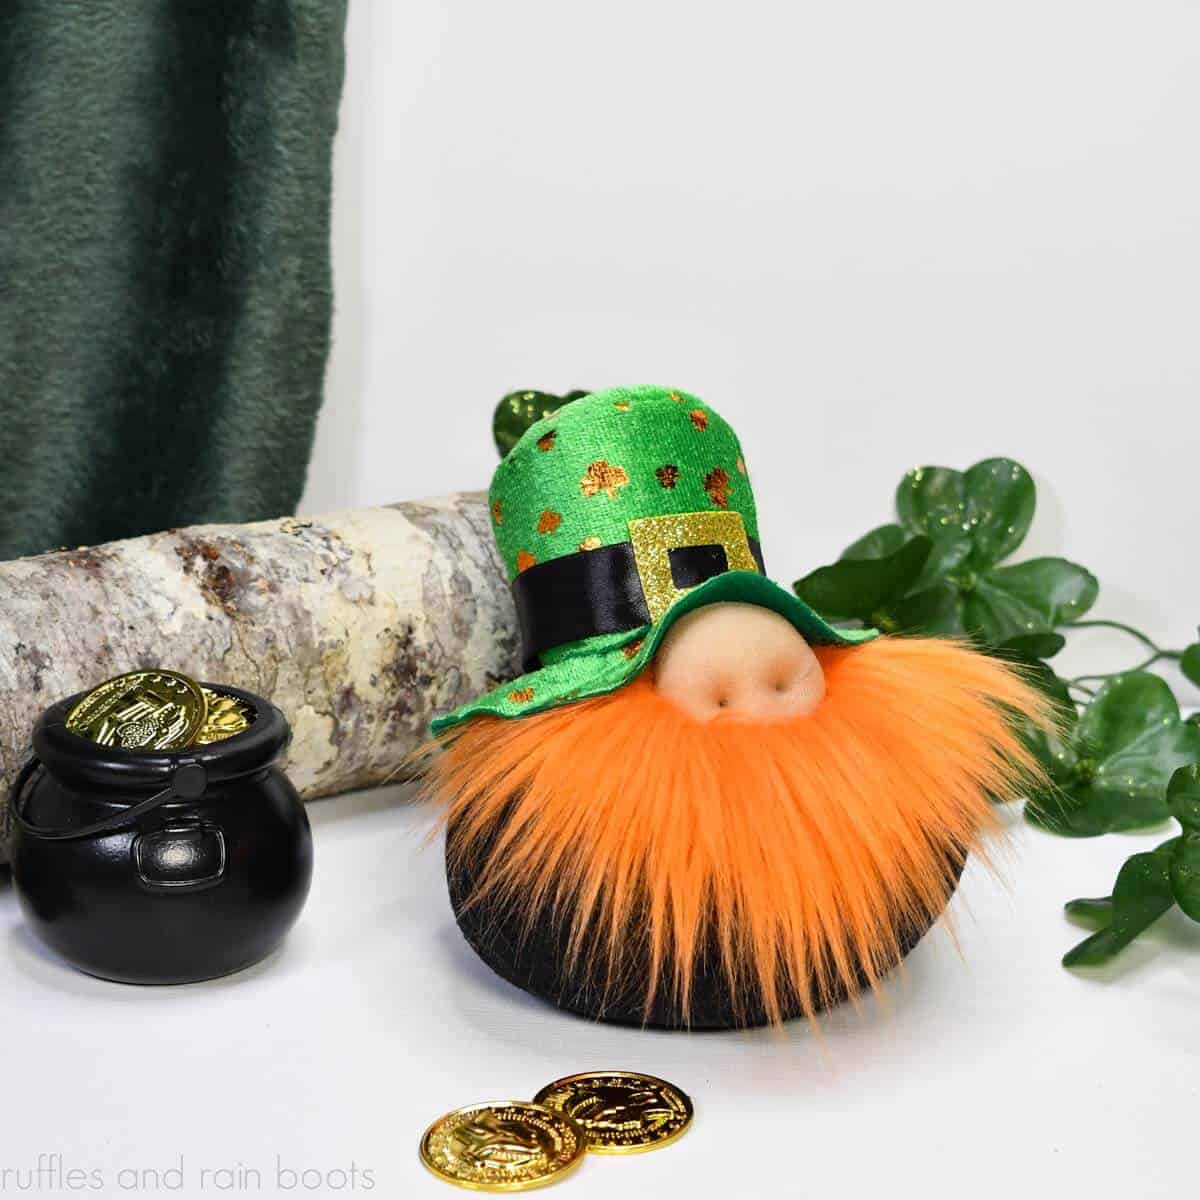 Close up square image showing a DIY leprechaun gnome for St Patrick's Day with green and gold hat, orange fur beard, and round black body sitting on a white table in front of green clover and a pot of gold coins.